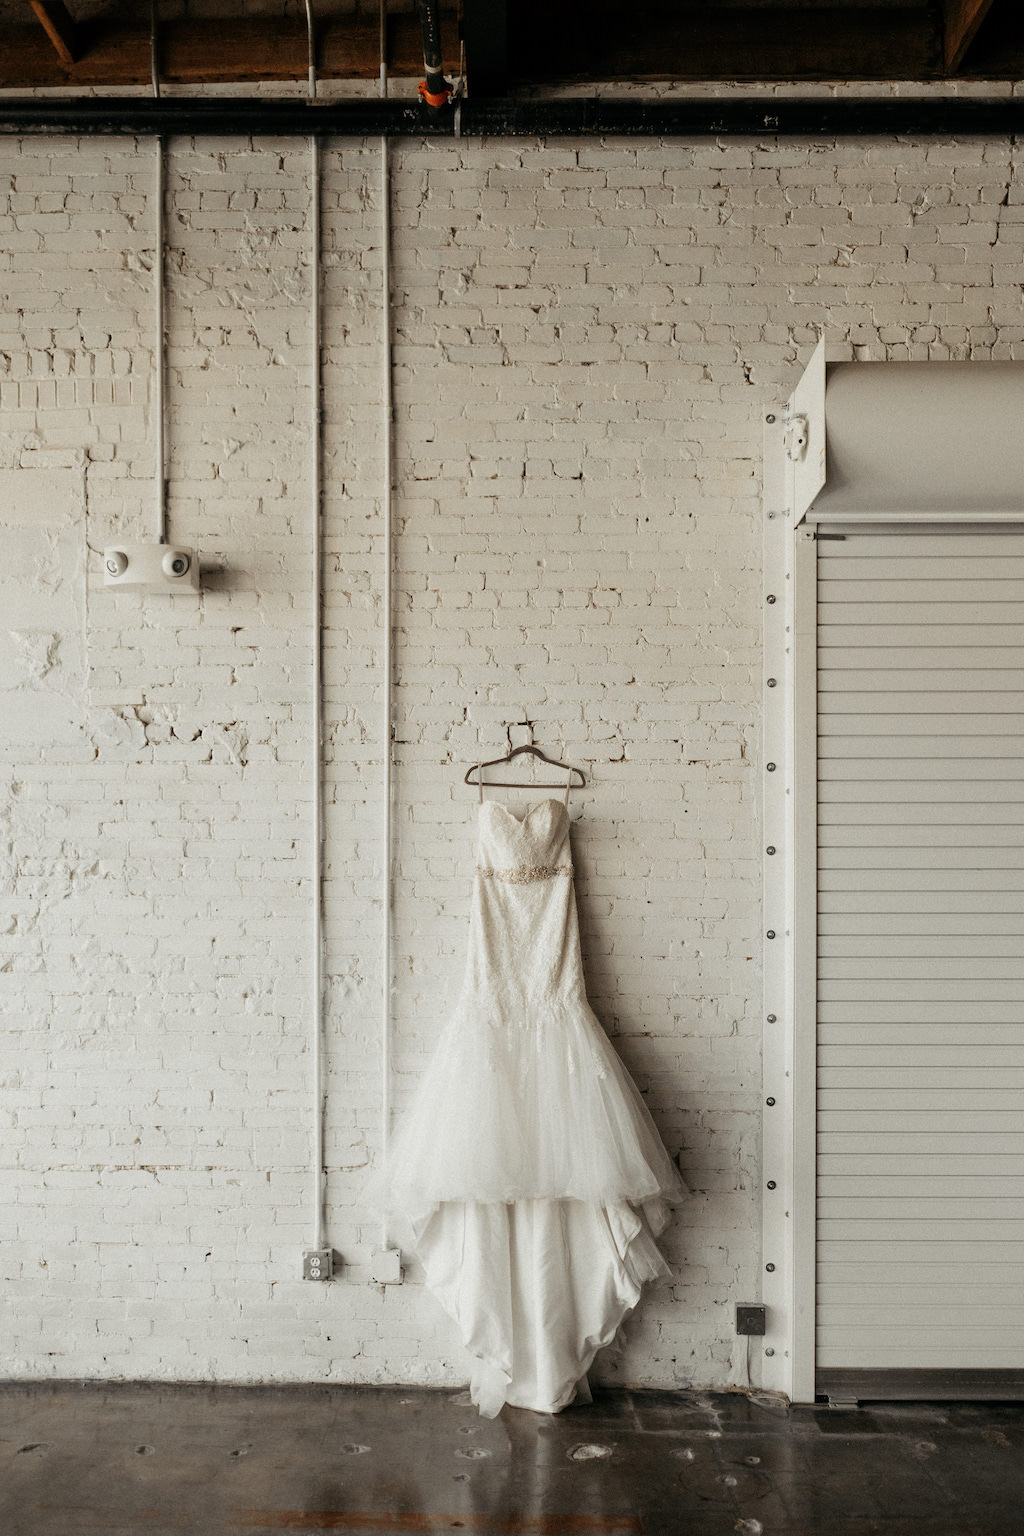 Lace Sweetheart Strapless Fitted Bodice with Rhinestone Belt, Tulle Full Skirt Wedding Dress Hanging on Hanger and White Brick Wall Backdrop | Lakeland Industrial Modern Wedding Venue and Event Space Haus 820